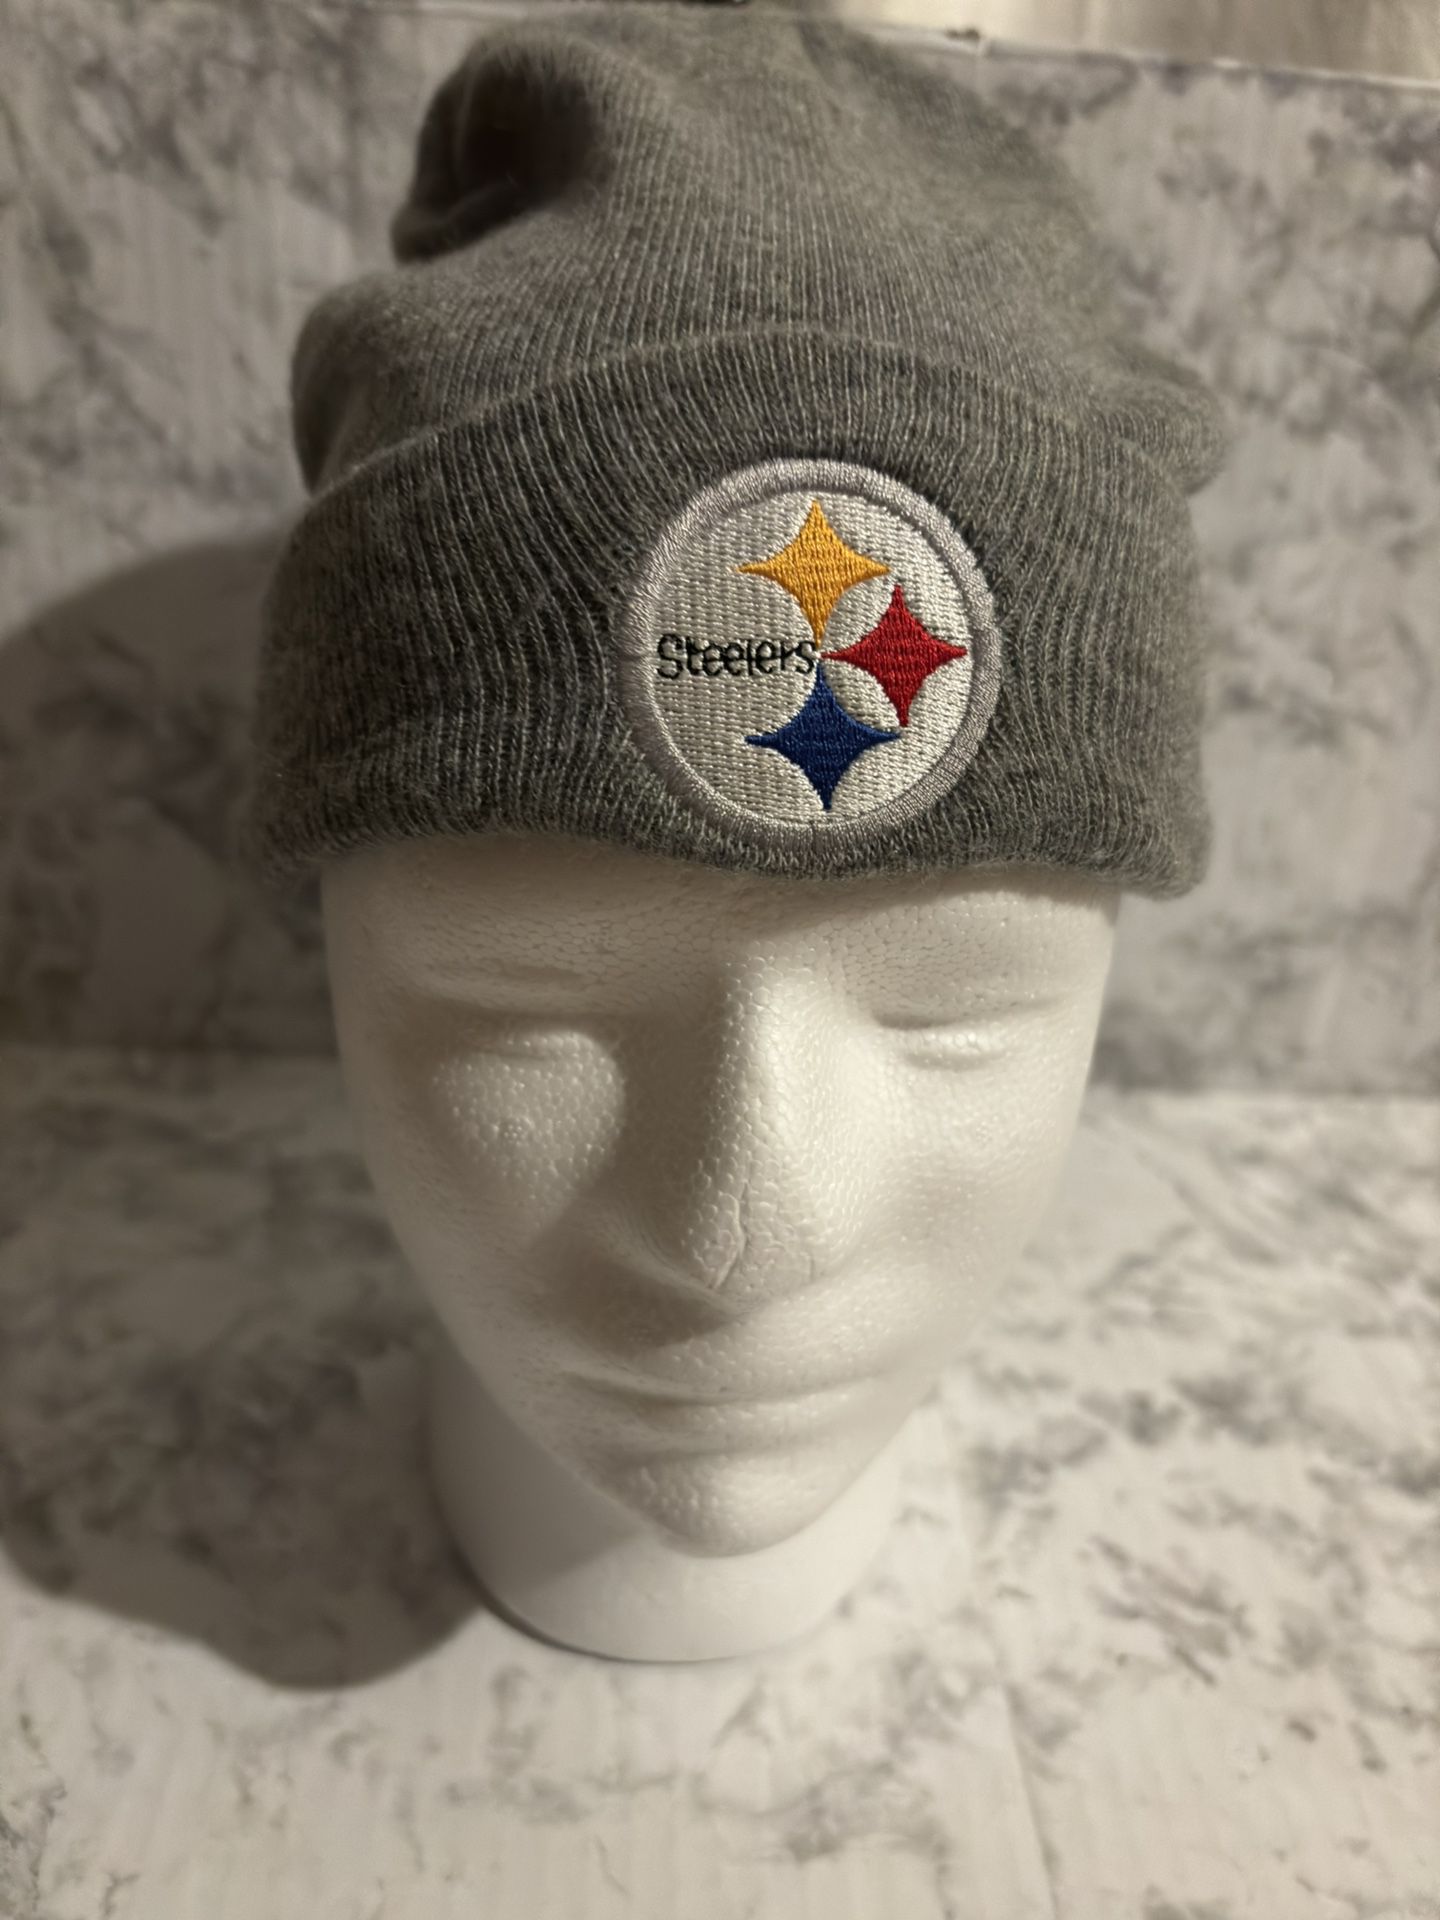 Pittsburgh Steelers Winter Knit Beanie Hat Gray NFL